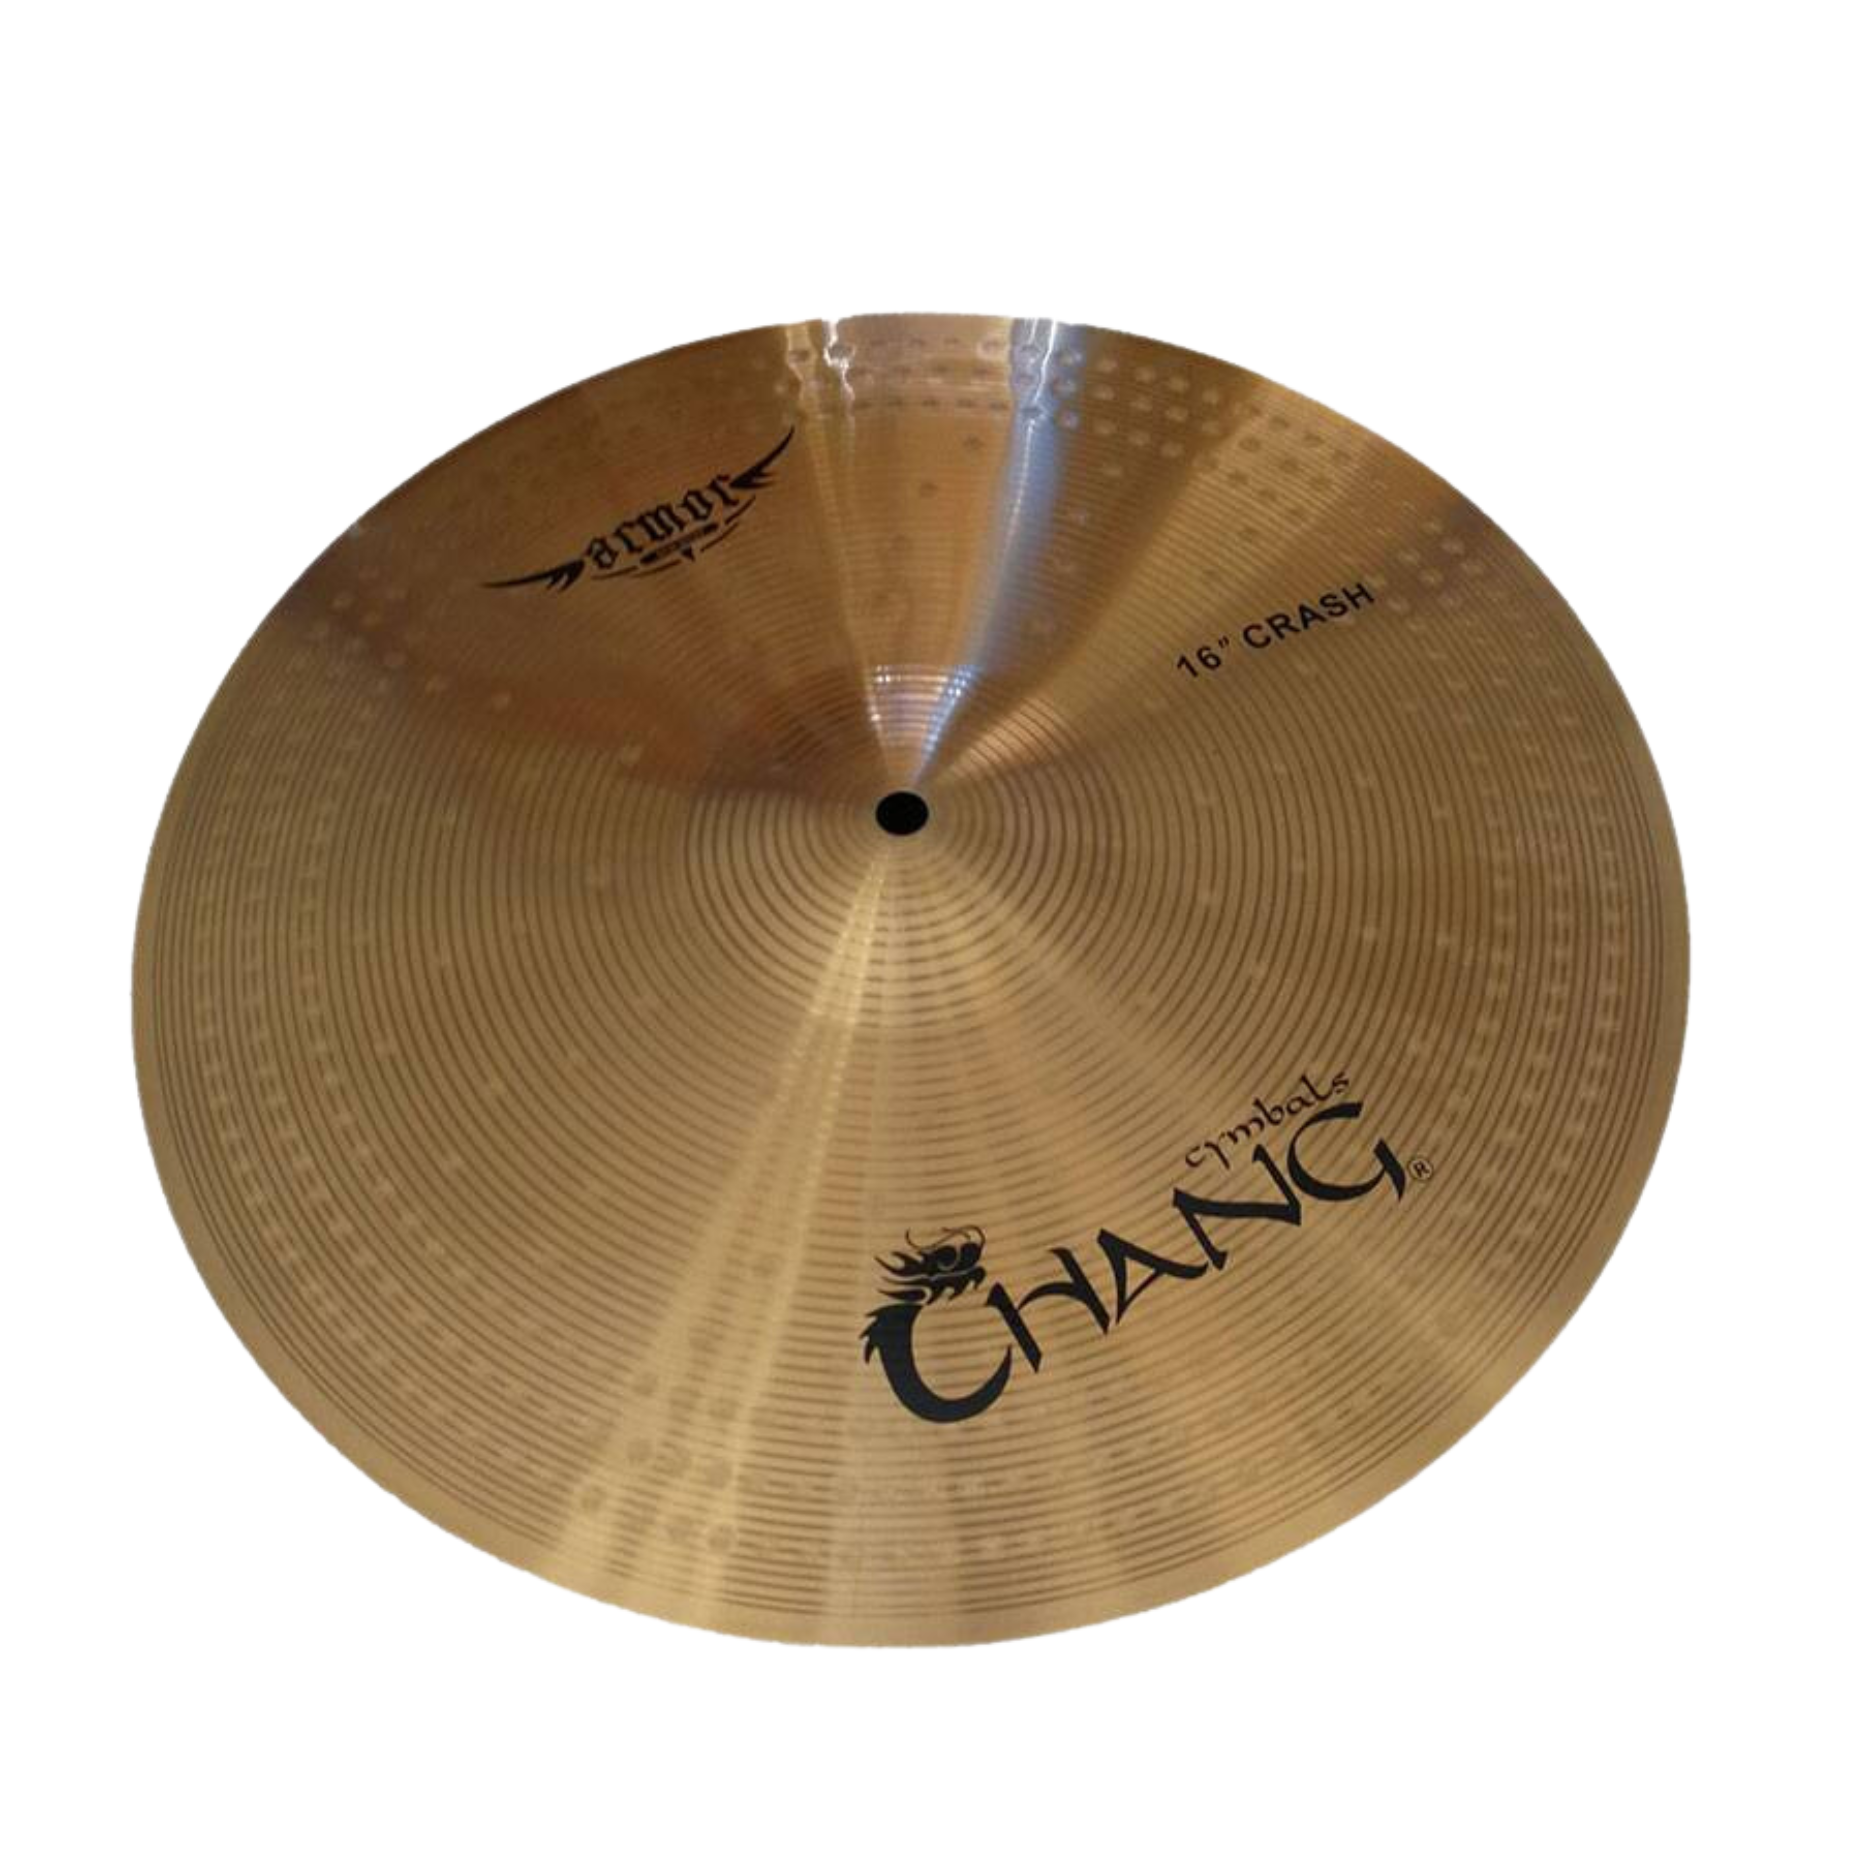 CHANG AR-CM16Y FAST CRASH CYMBAL 16 INCHES SIZE WITH BRASS FINISHES